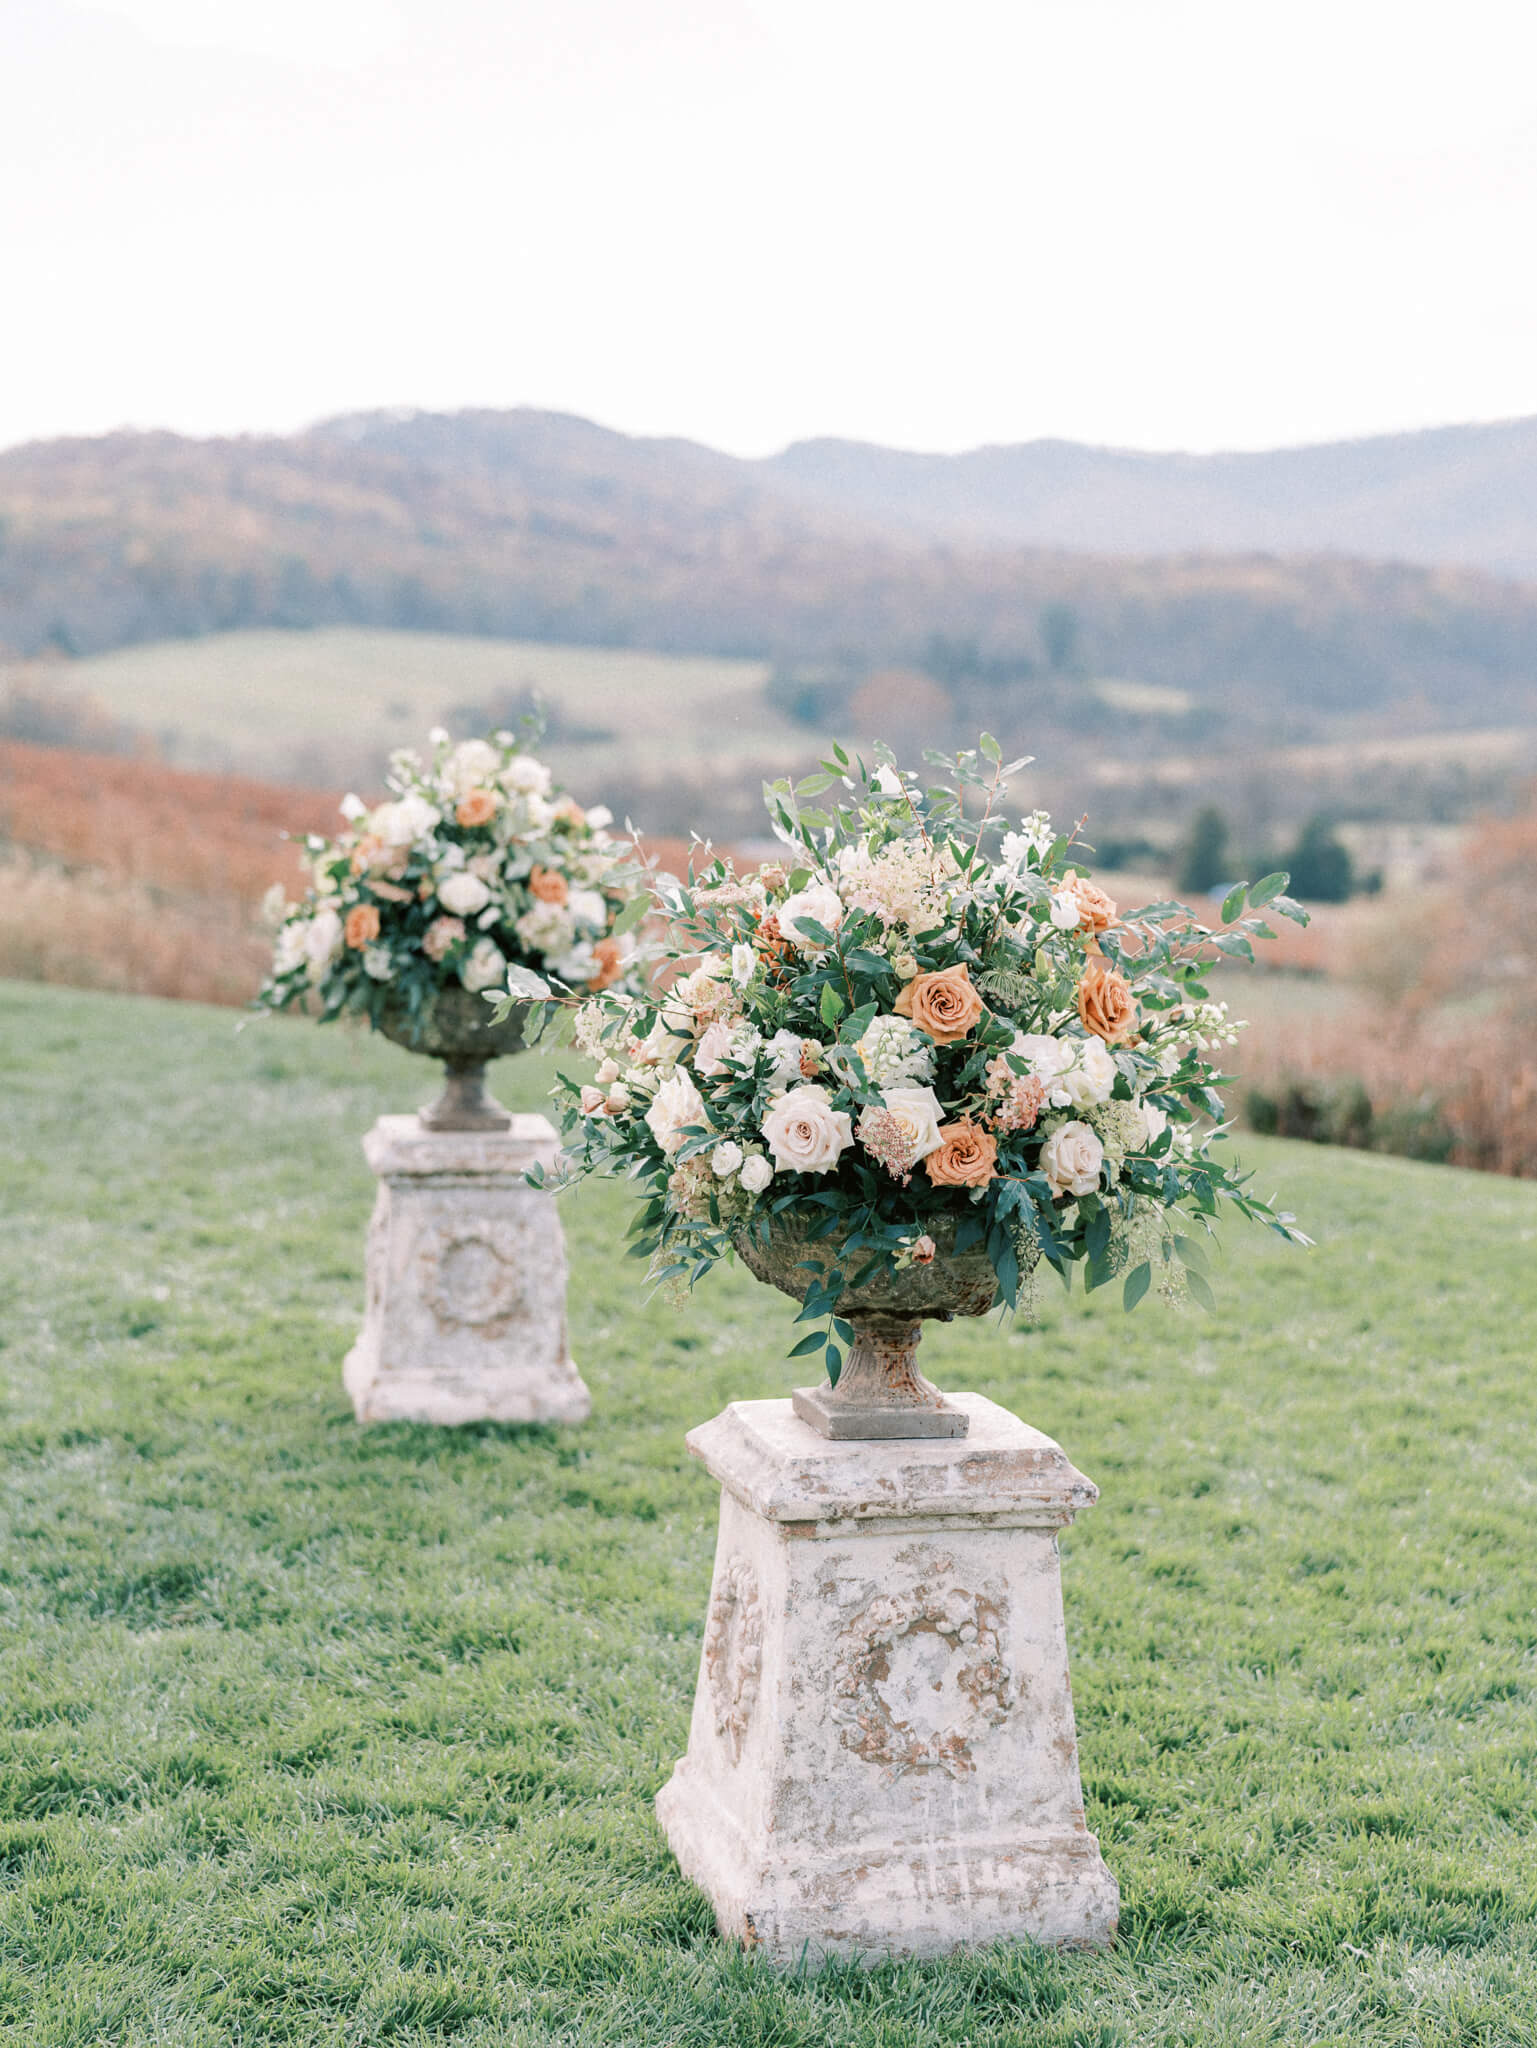 Extravagant floral ceremony pieces of peach, blush and cream roses sitting on stone pillars in front of mountain views at a Pippin Hill wedding.